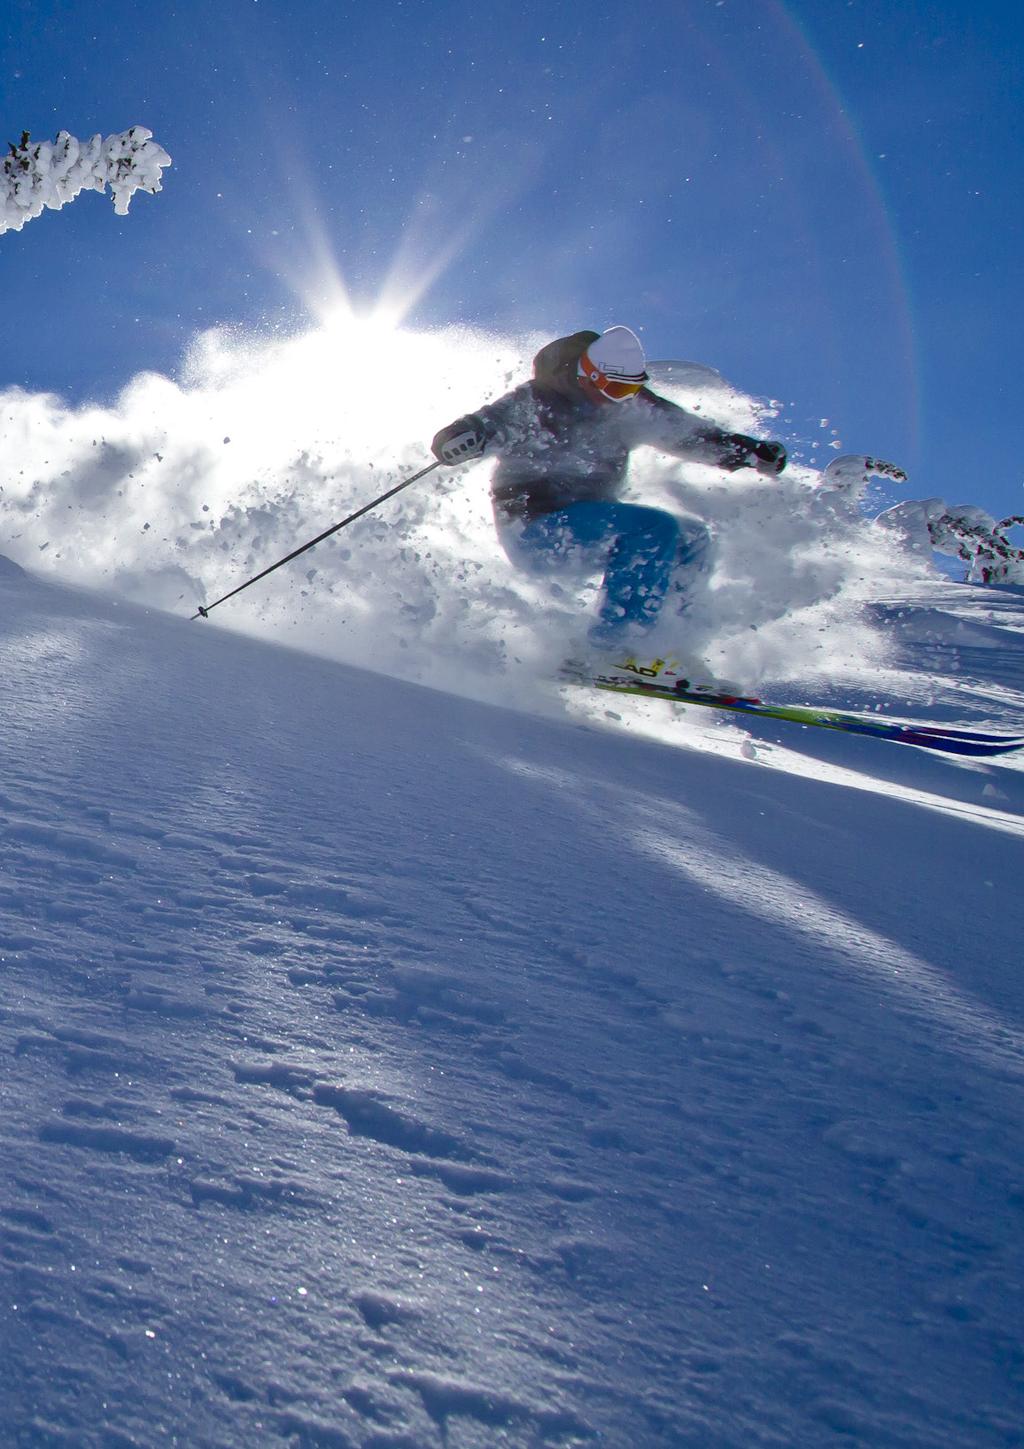 Big White Ski Resort offers a wide range of activities both on and off the slopes.